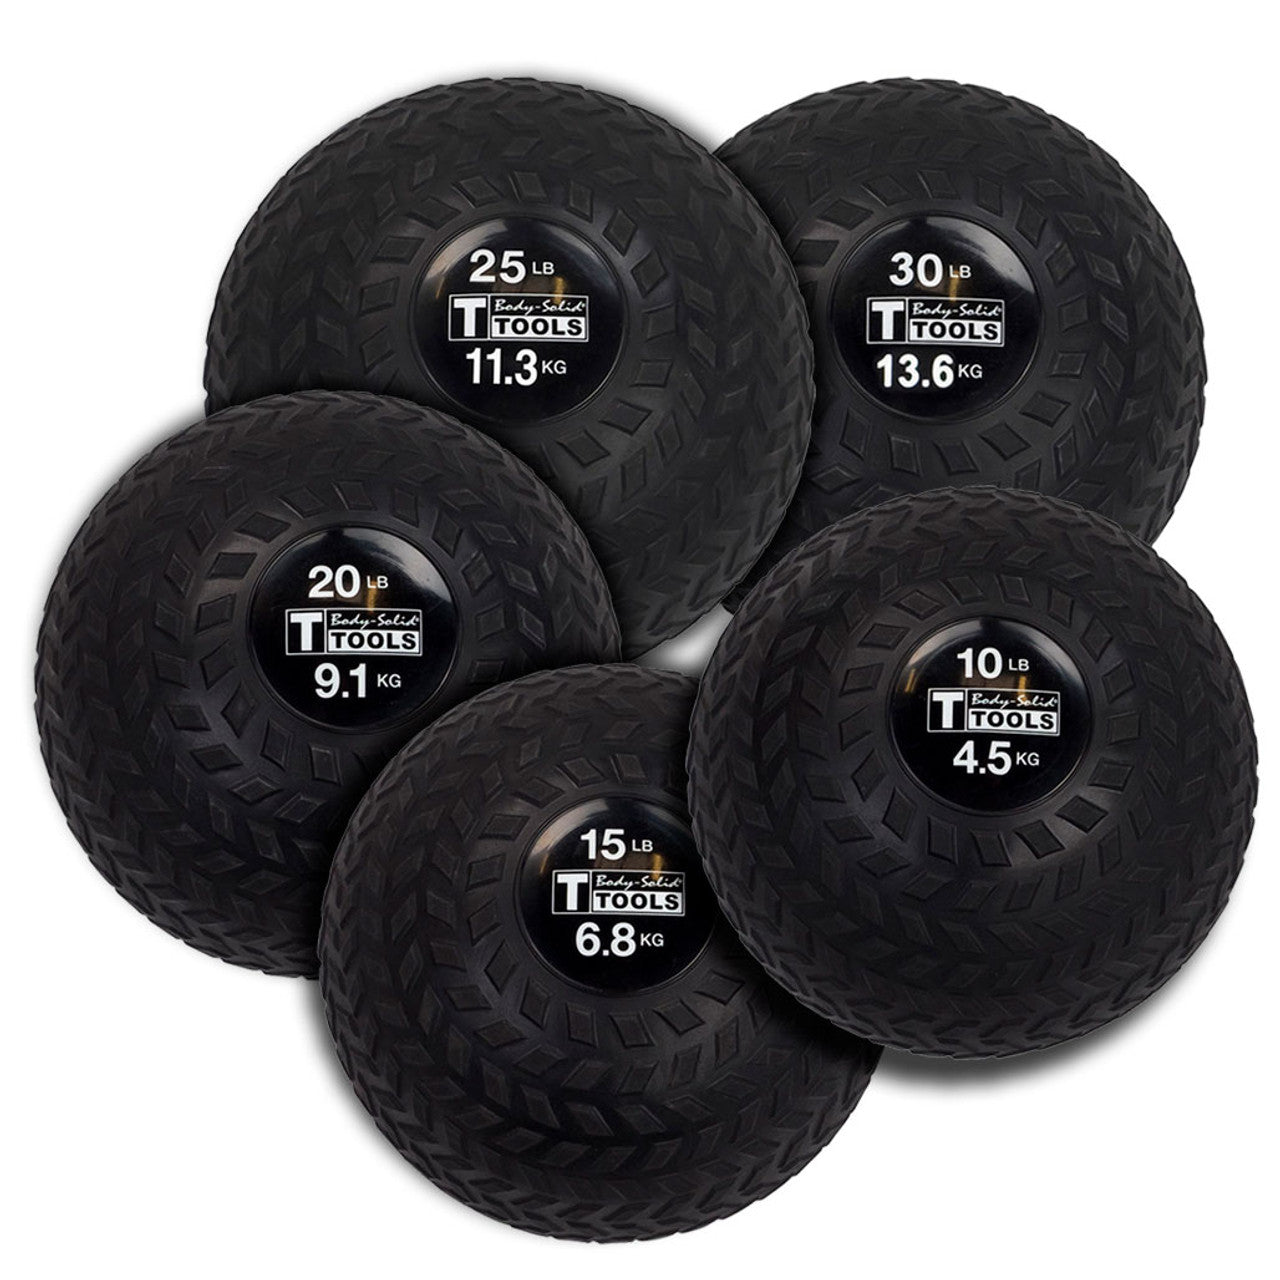 Body-Solid Tools Tire Tread Slam Balls, from 10 to 30 lbs.